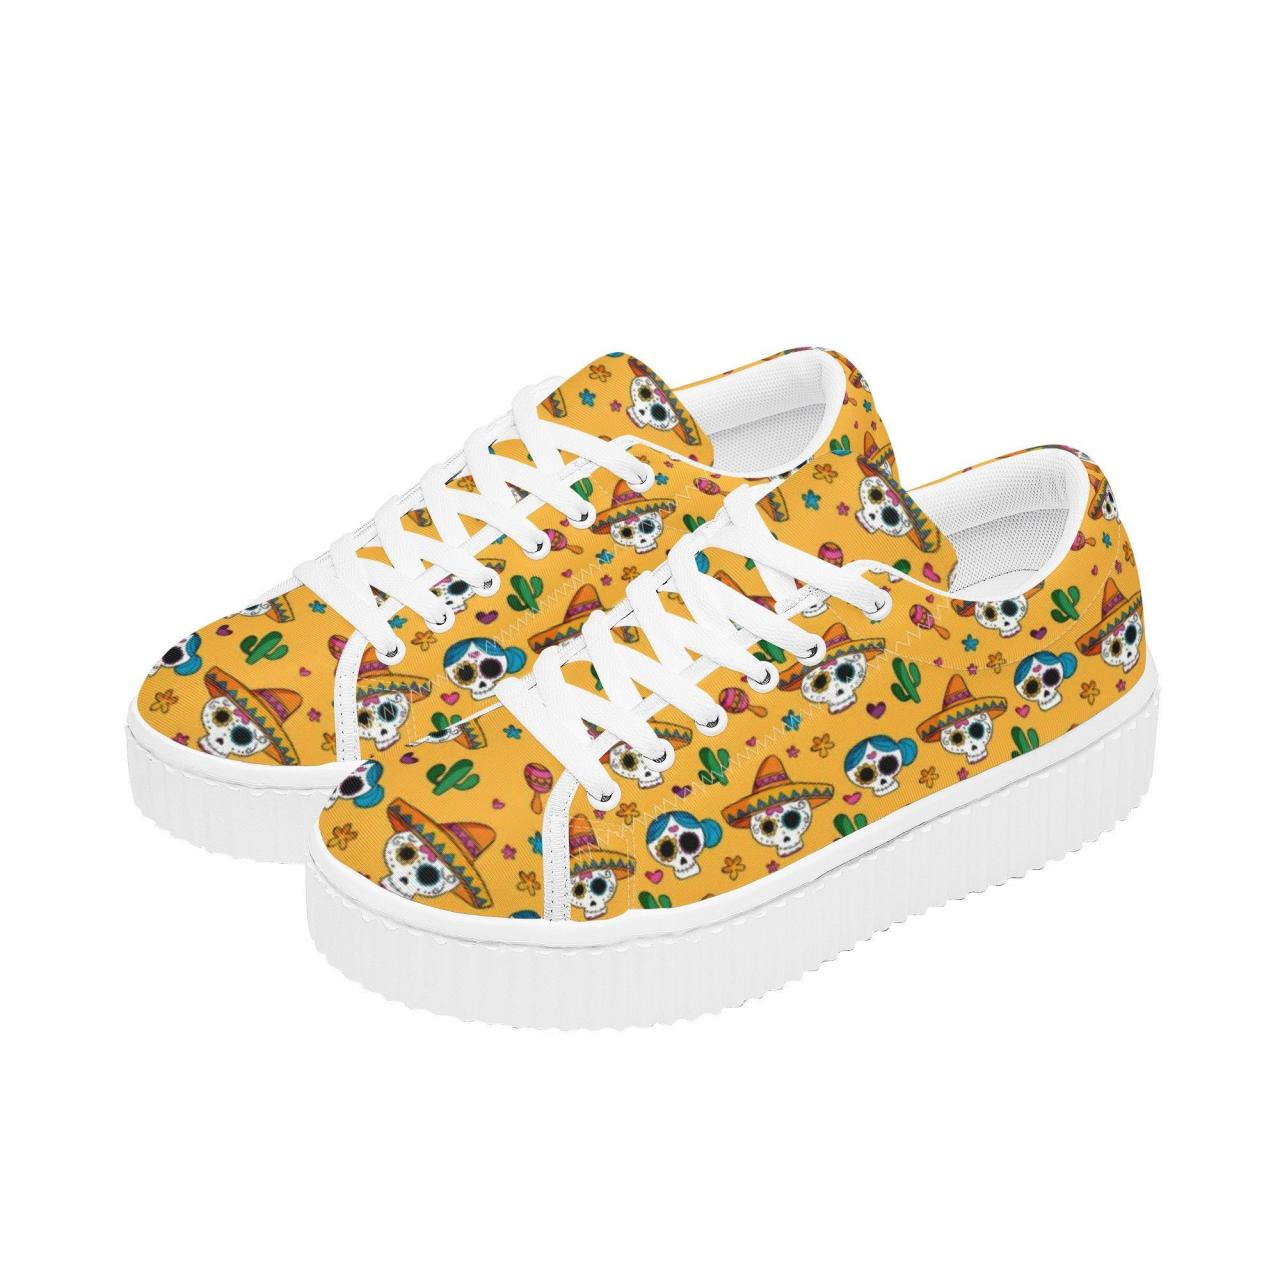 Floral Print Platform Shoes | Floral Sneakers | Floral Women Shoes | Floral Pattern | Custom Low Top Sneakers For Women